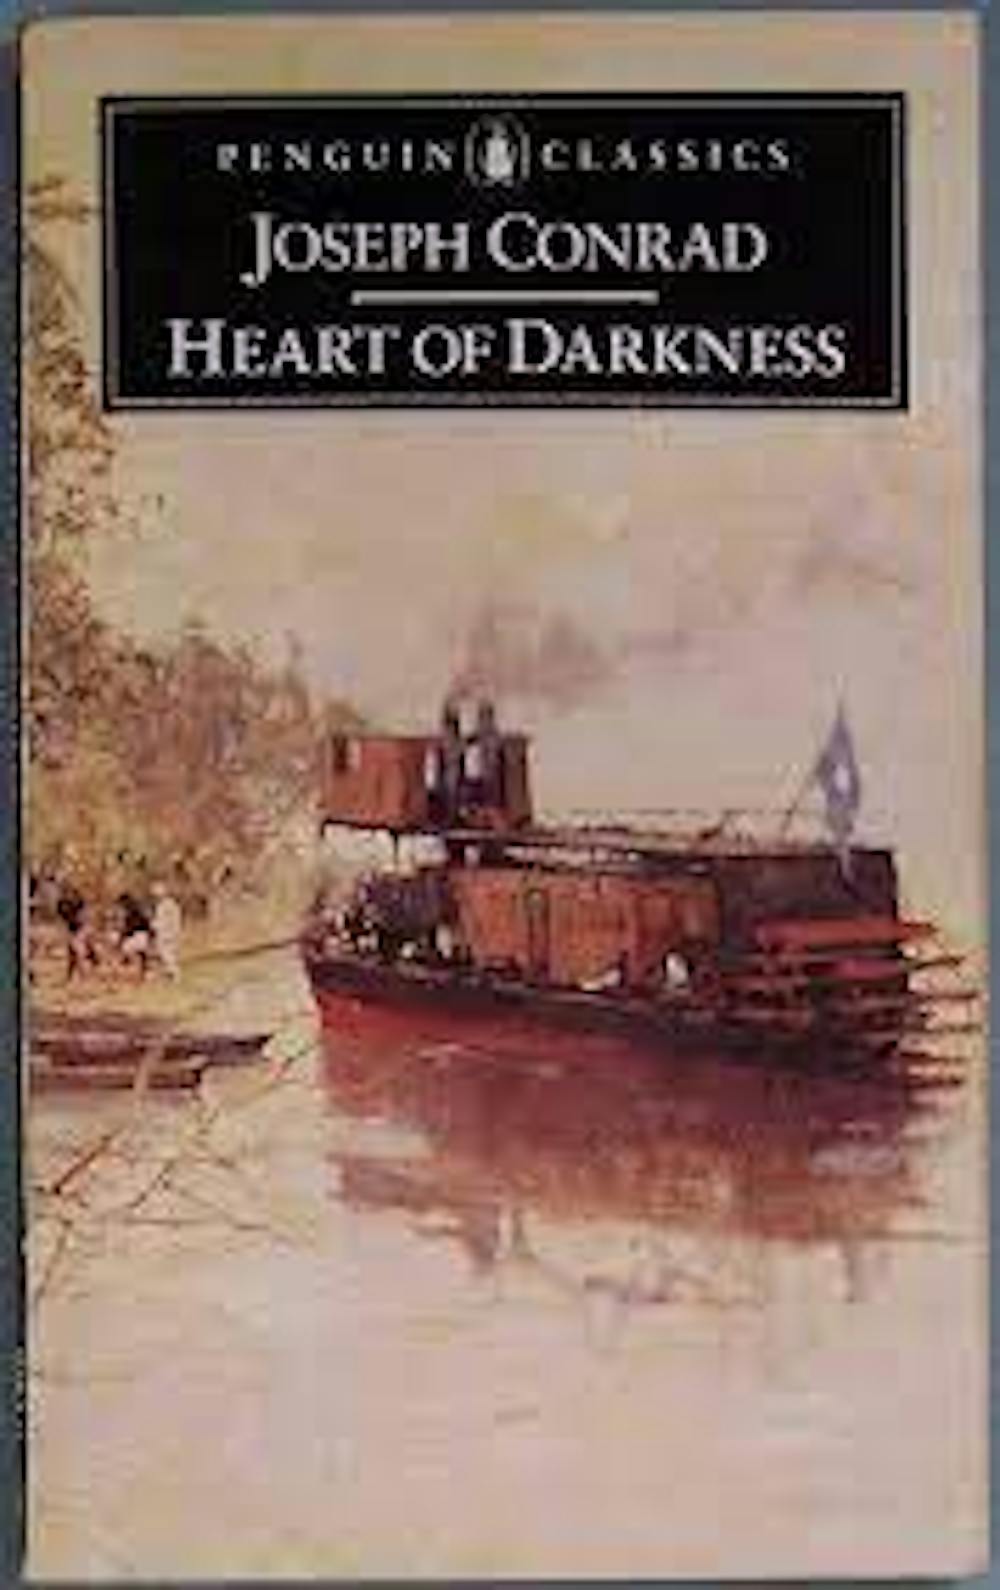 who wrote heart of darkness